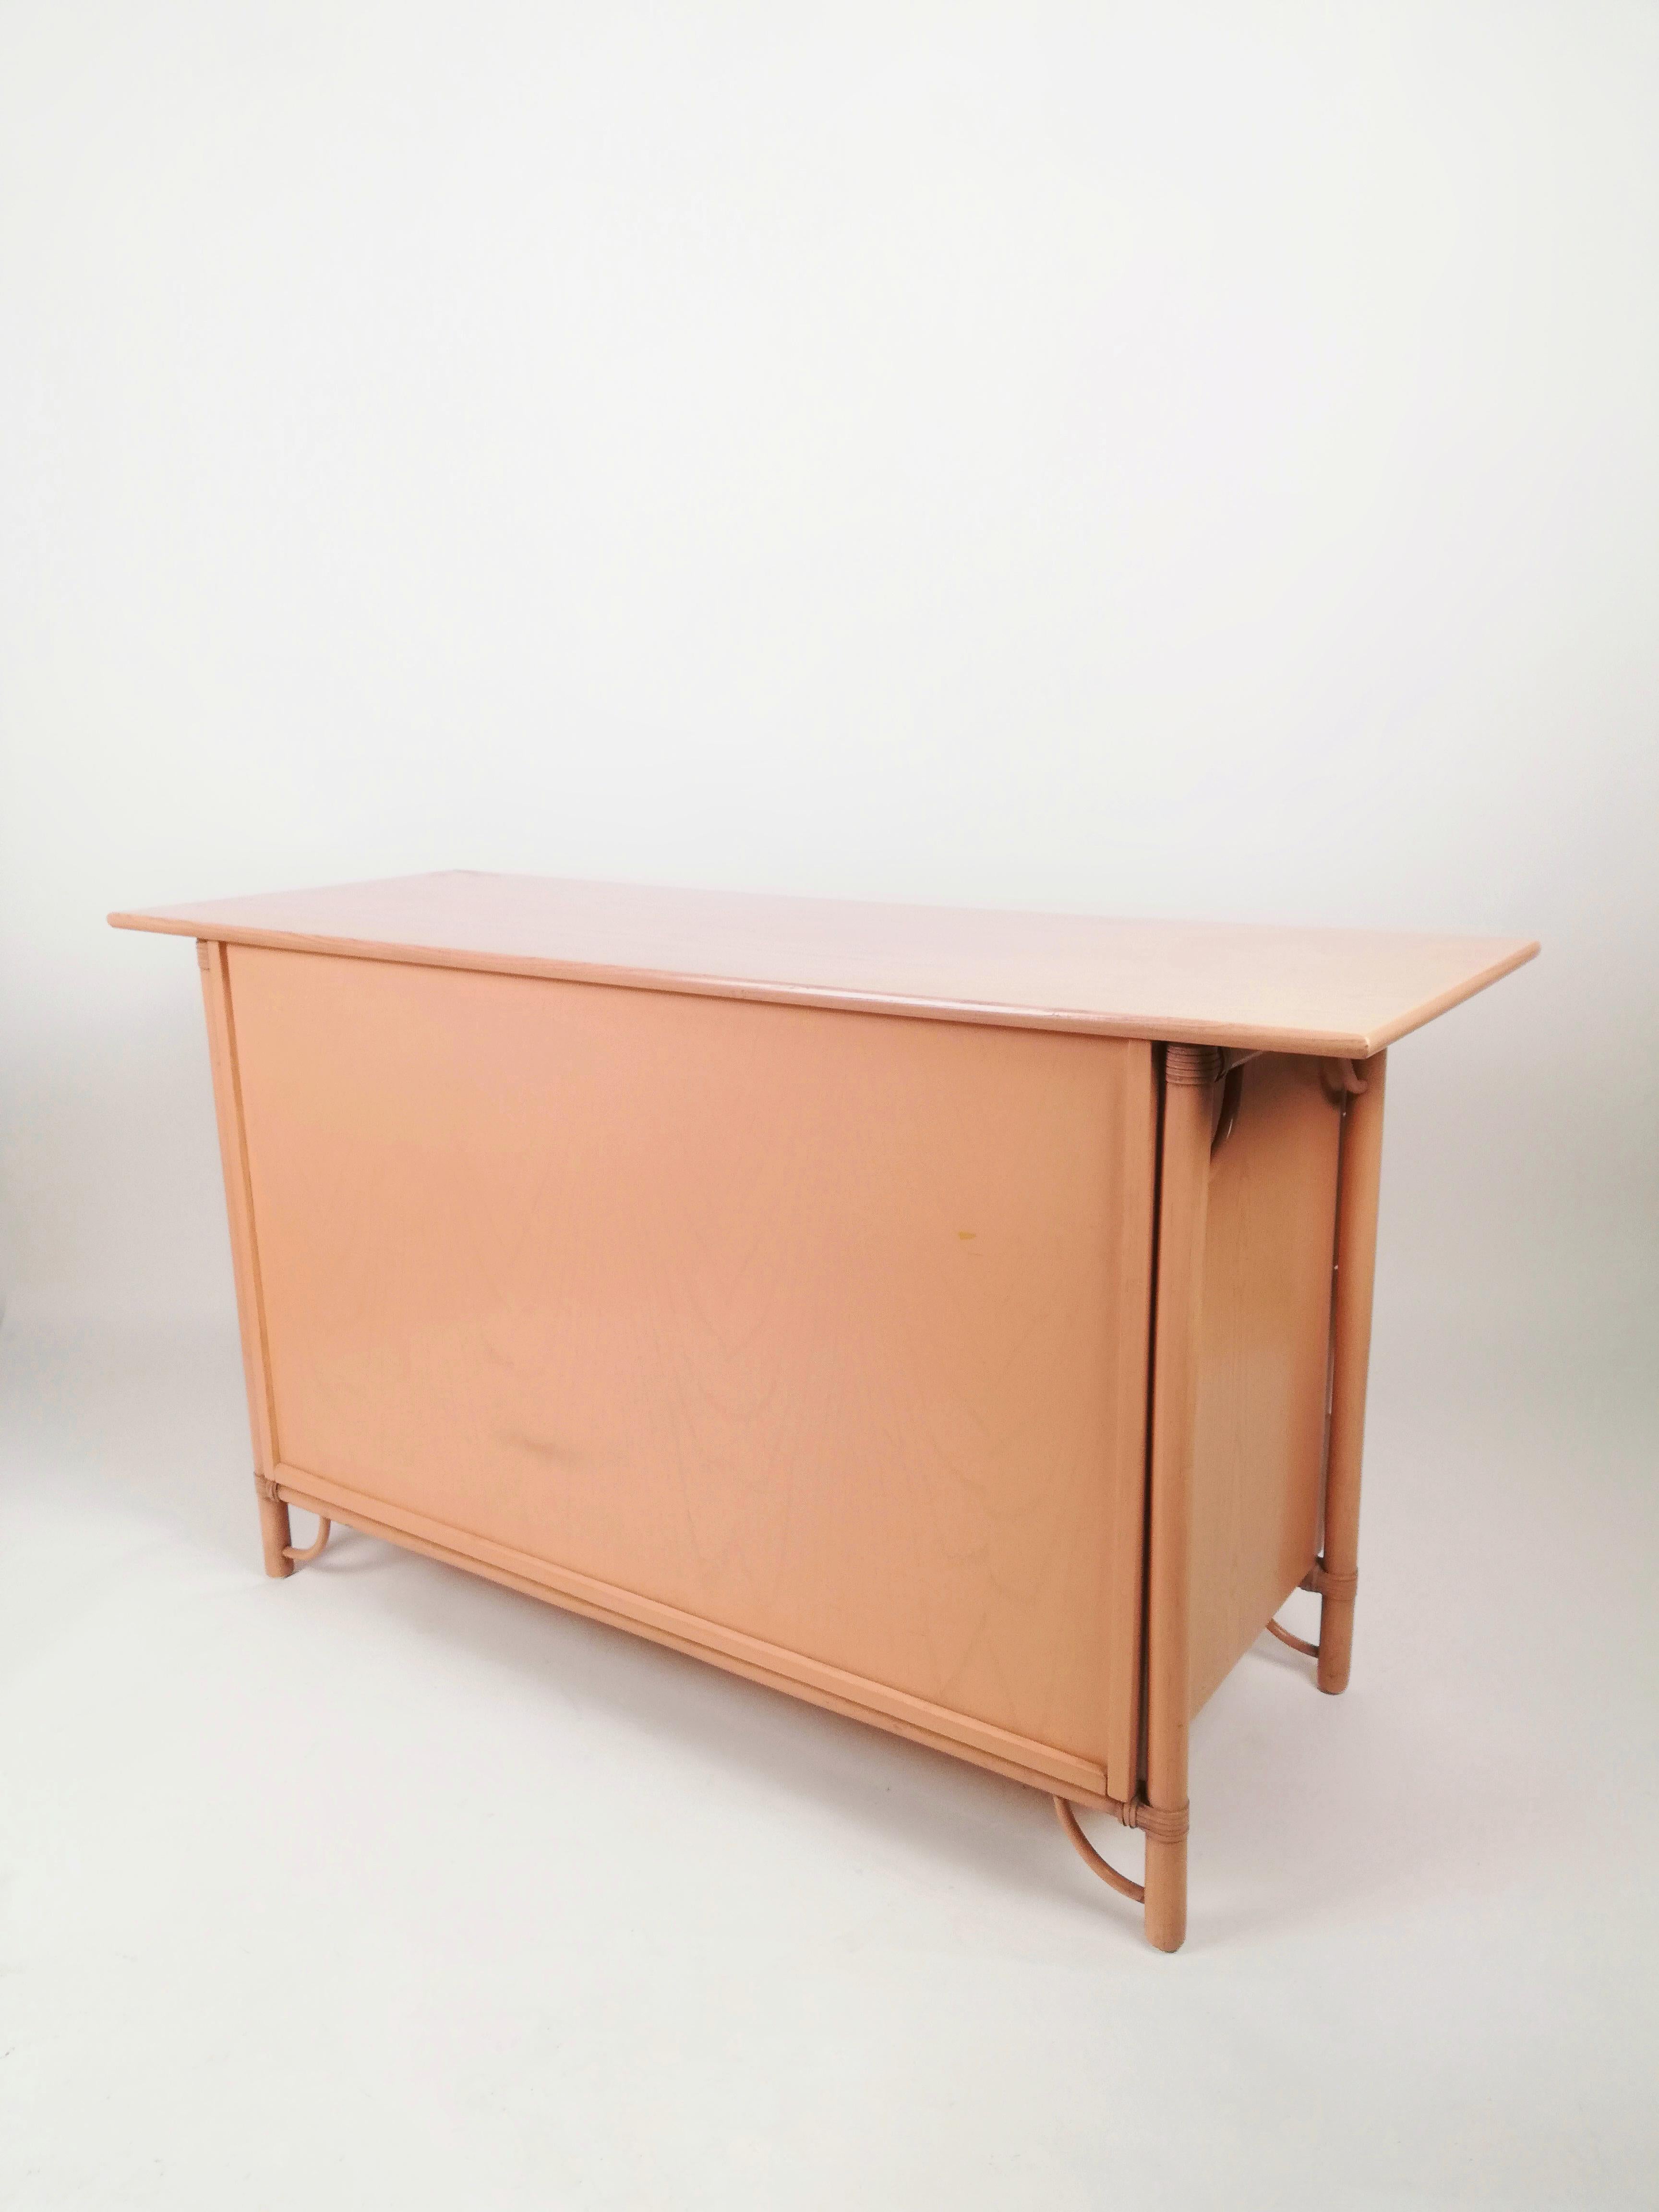 Pink Chest of Drawers in Bamboo, Oak Wood and Leather by Italo Gasparucci For Sale 9